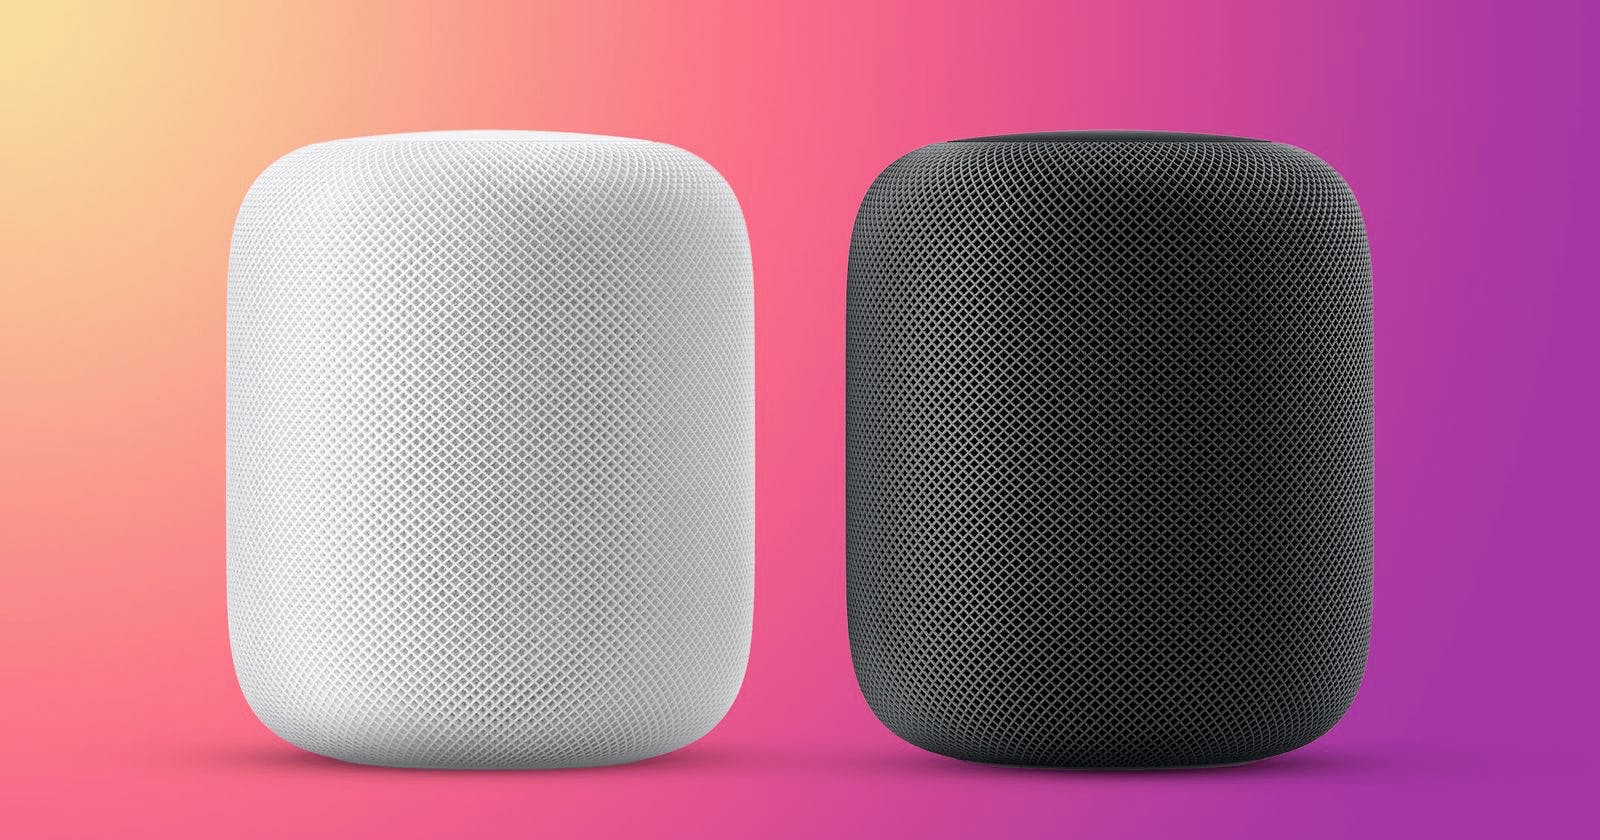 The New Regular-Sized HomePod Was Released Today